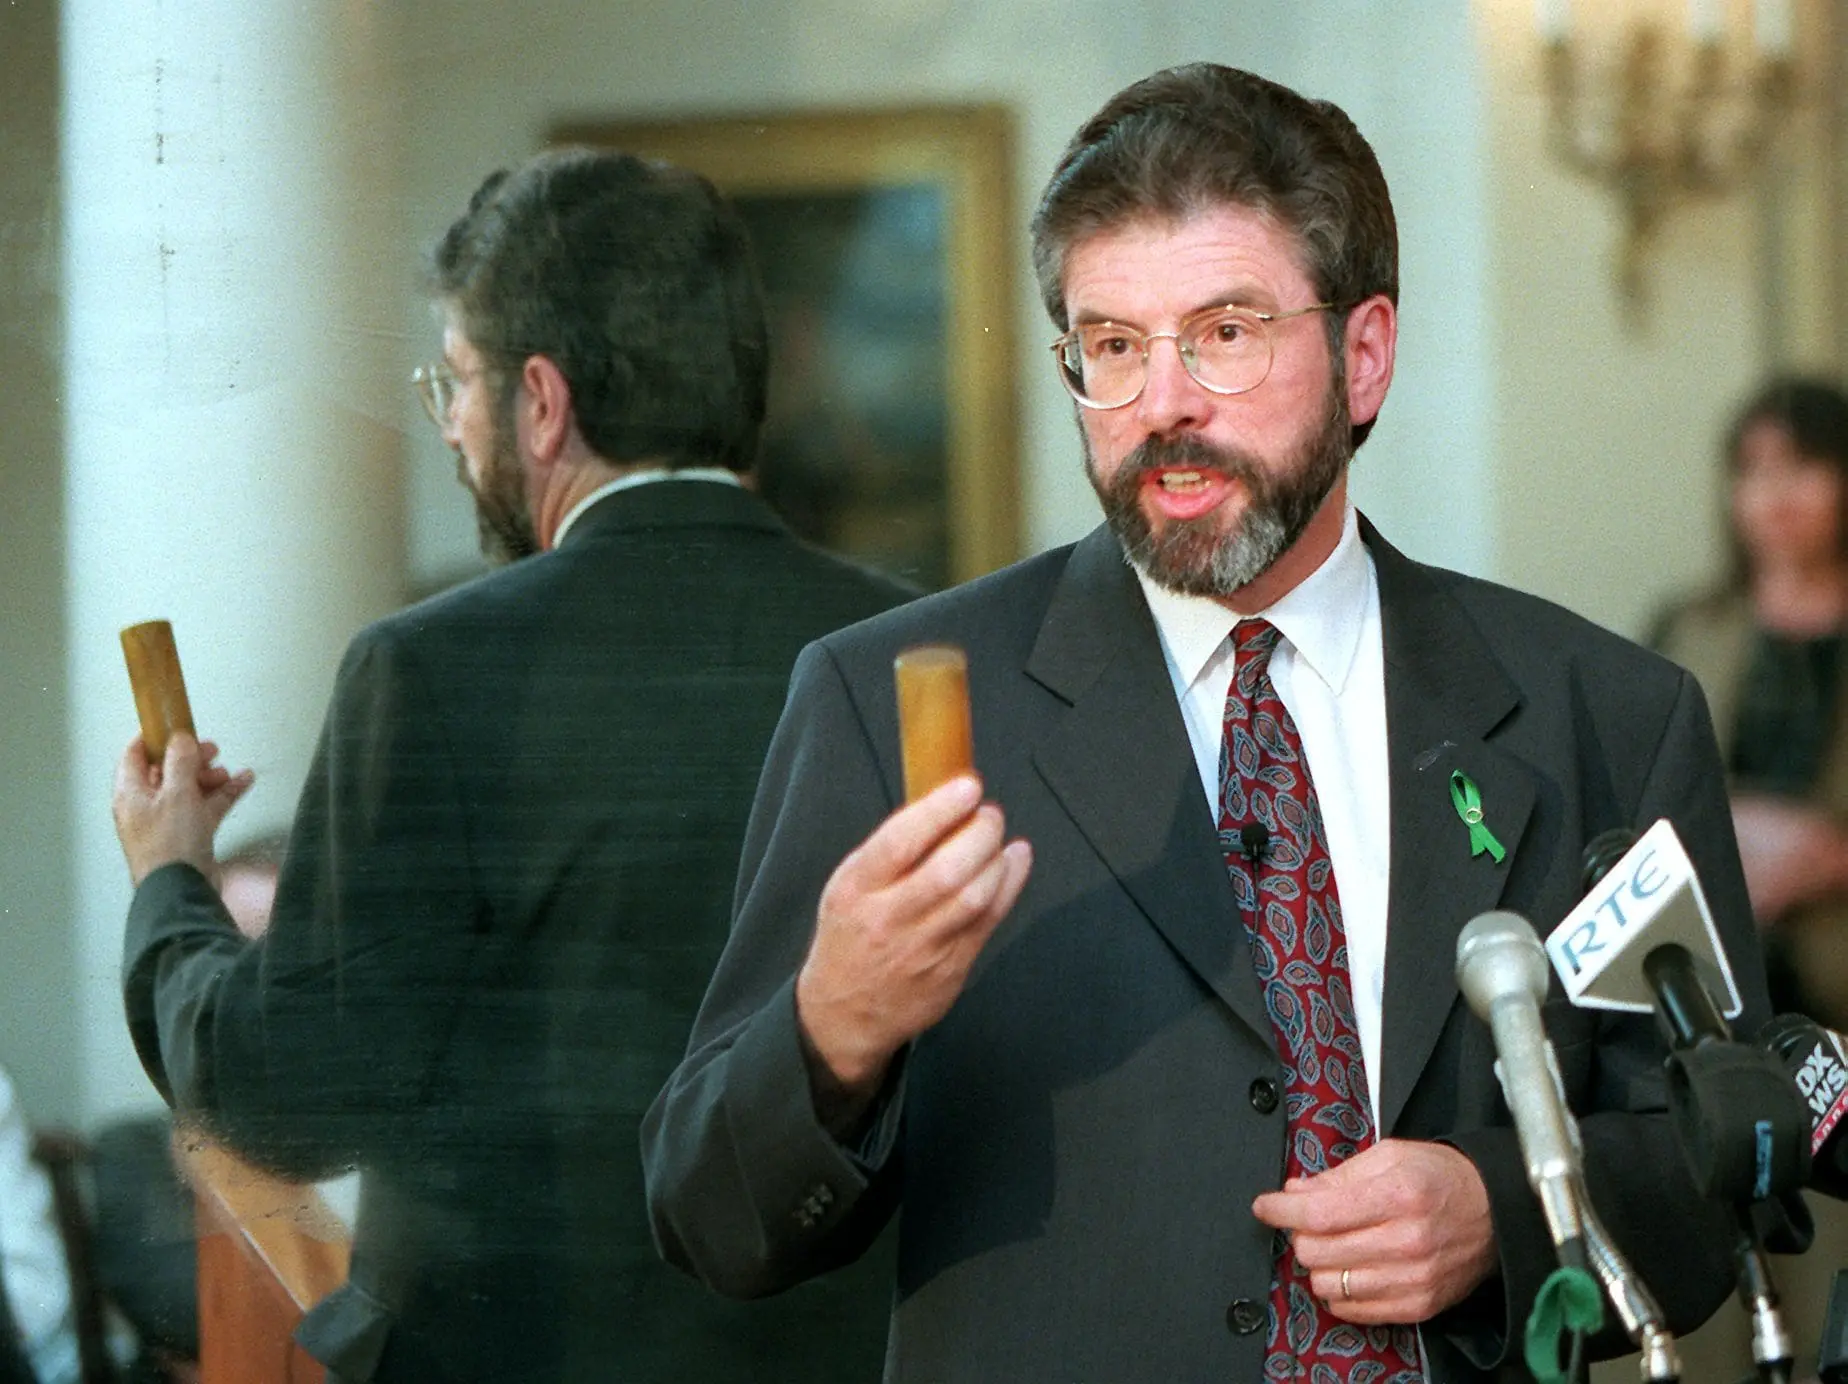 Sinn Fein President Gerry Adams holds up a rubber bullet during a speech to the American Irish Historical Society in New York, May 1998.